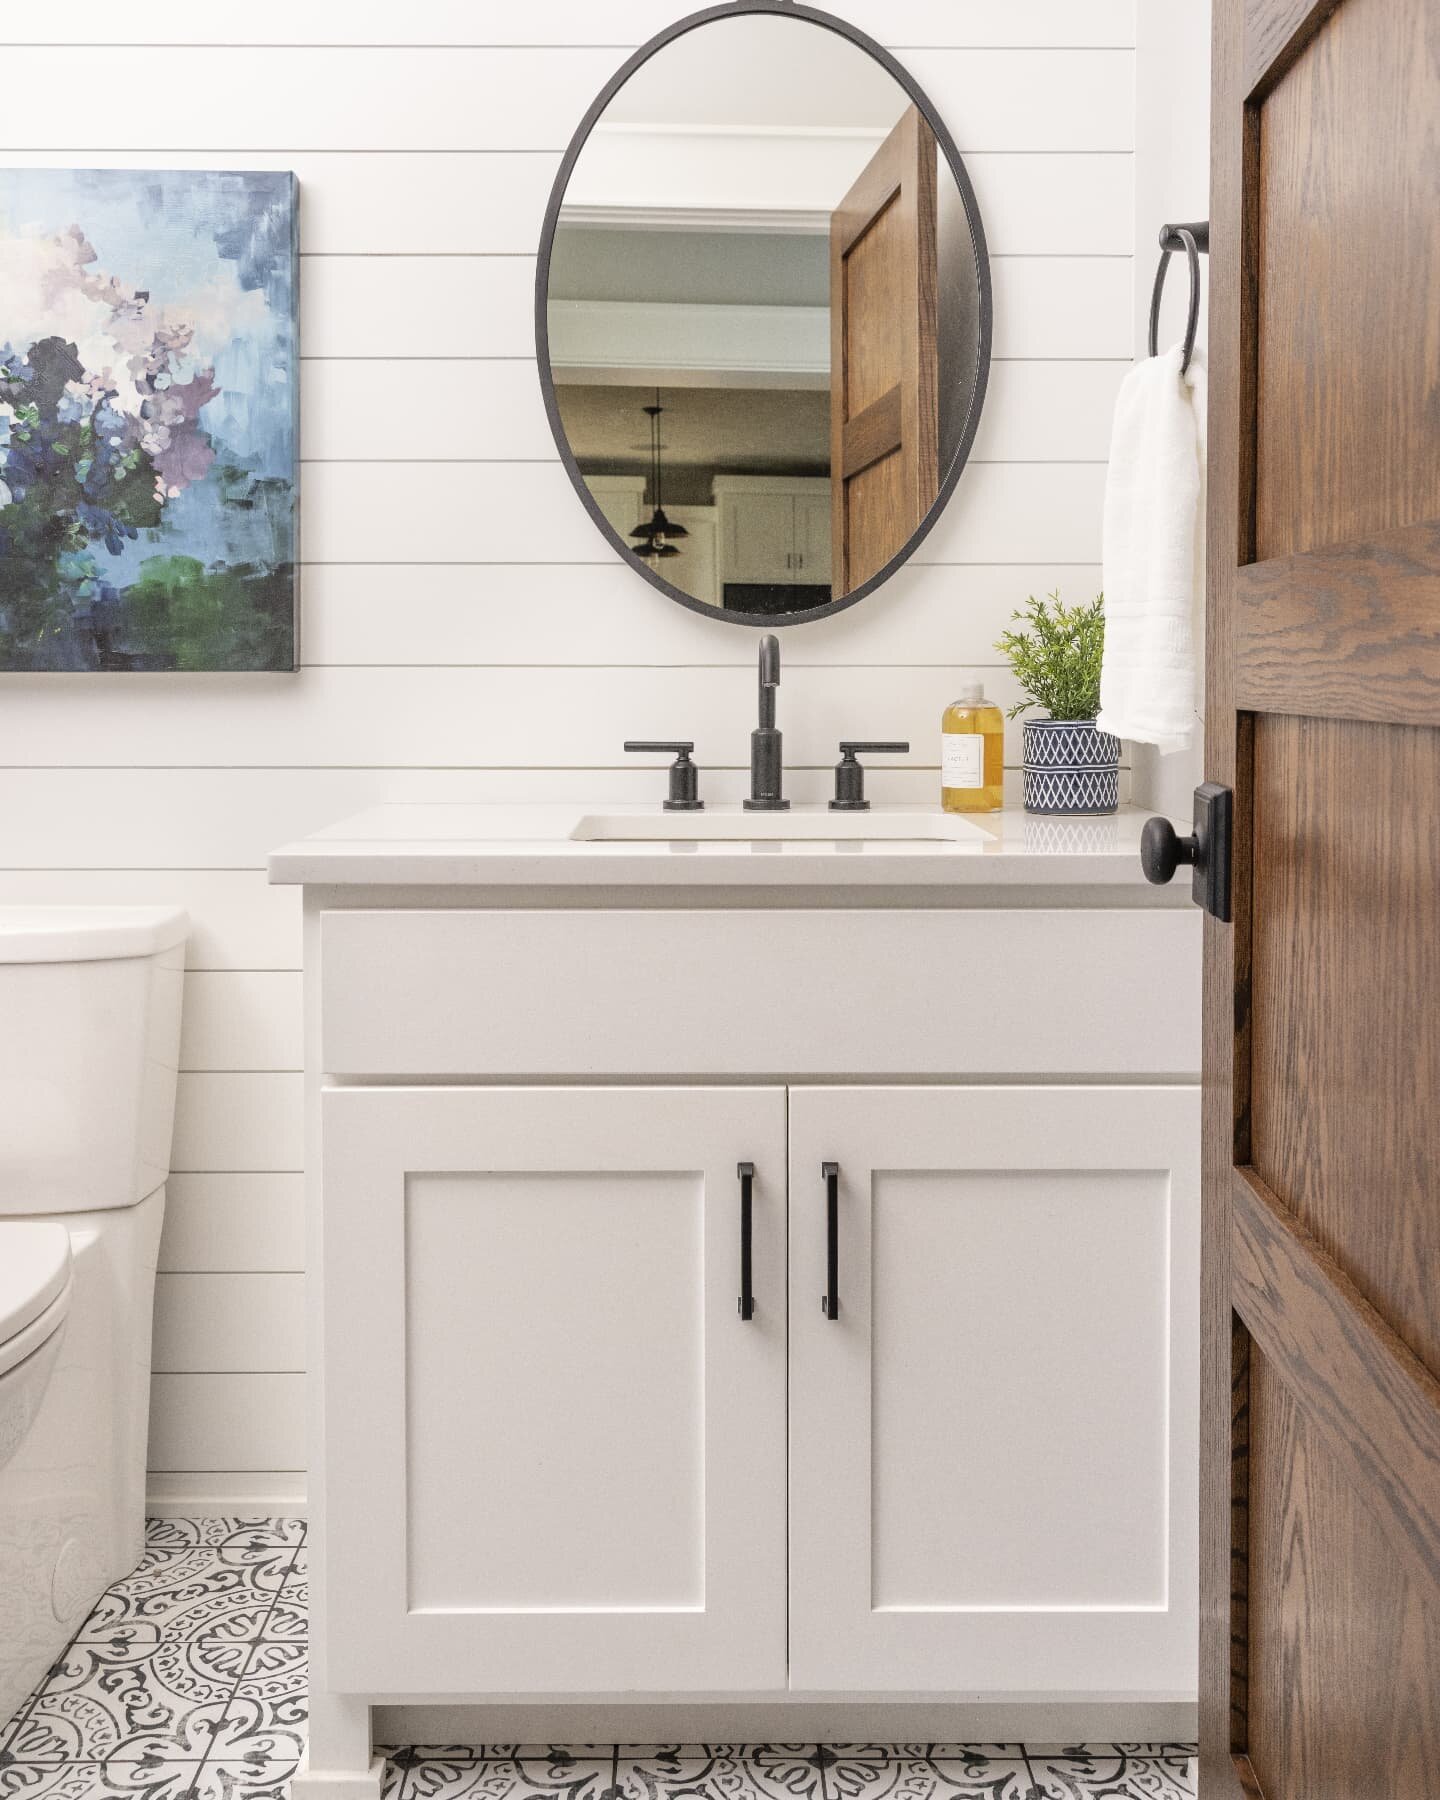 A little powder bath love, don't forget this is one of the busiest rooms during holiday gatherings. 

@danadamewoodphotography @blksheepomaha 

#omaharemodeler #interiordesign #myinteriorstyle #bathroomdesign #powderroom #nebraska #nebraskaphotograph